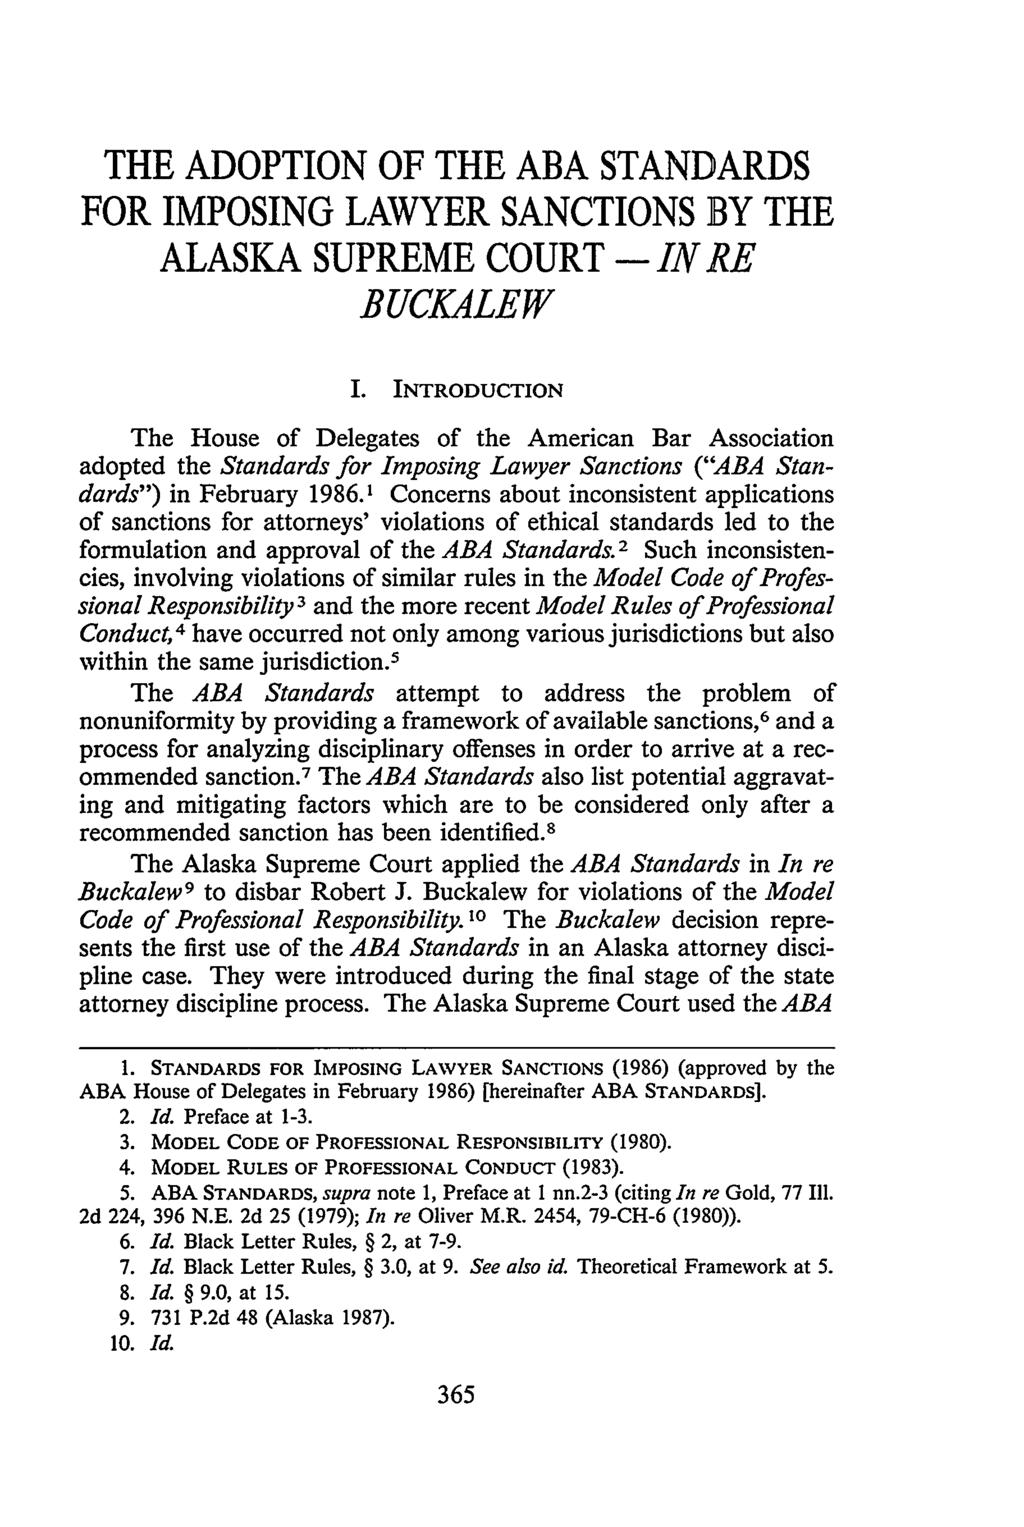 THE ADOPTION OF THE ABA STANDARDS FOR IMPOSING LAWYER SANCTIONS BY THE ALASKA SUPREME COURT - IN RE BUCK4LEW I.